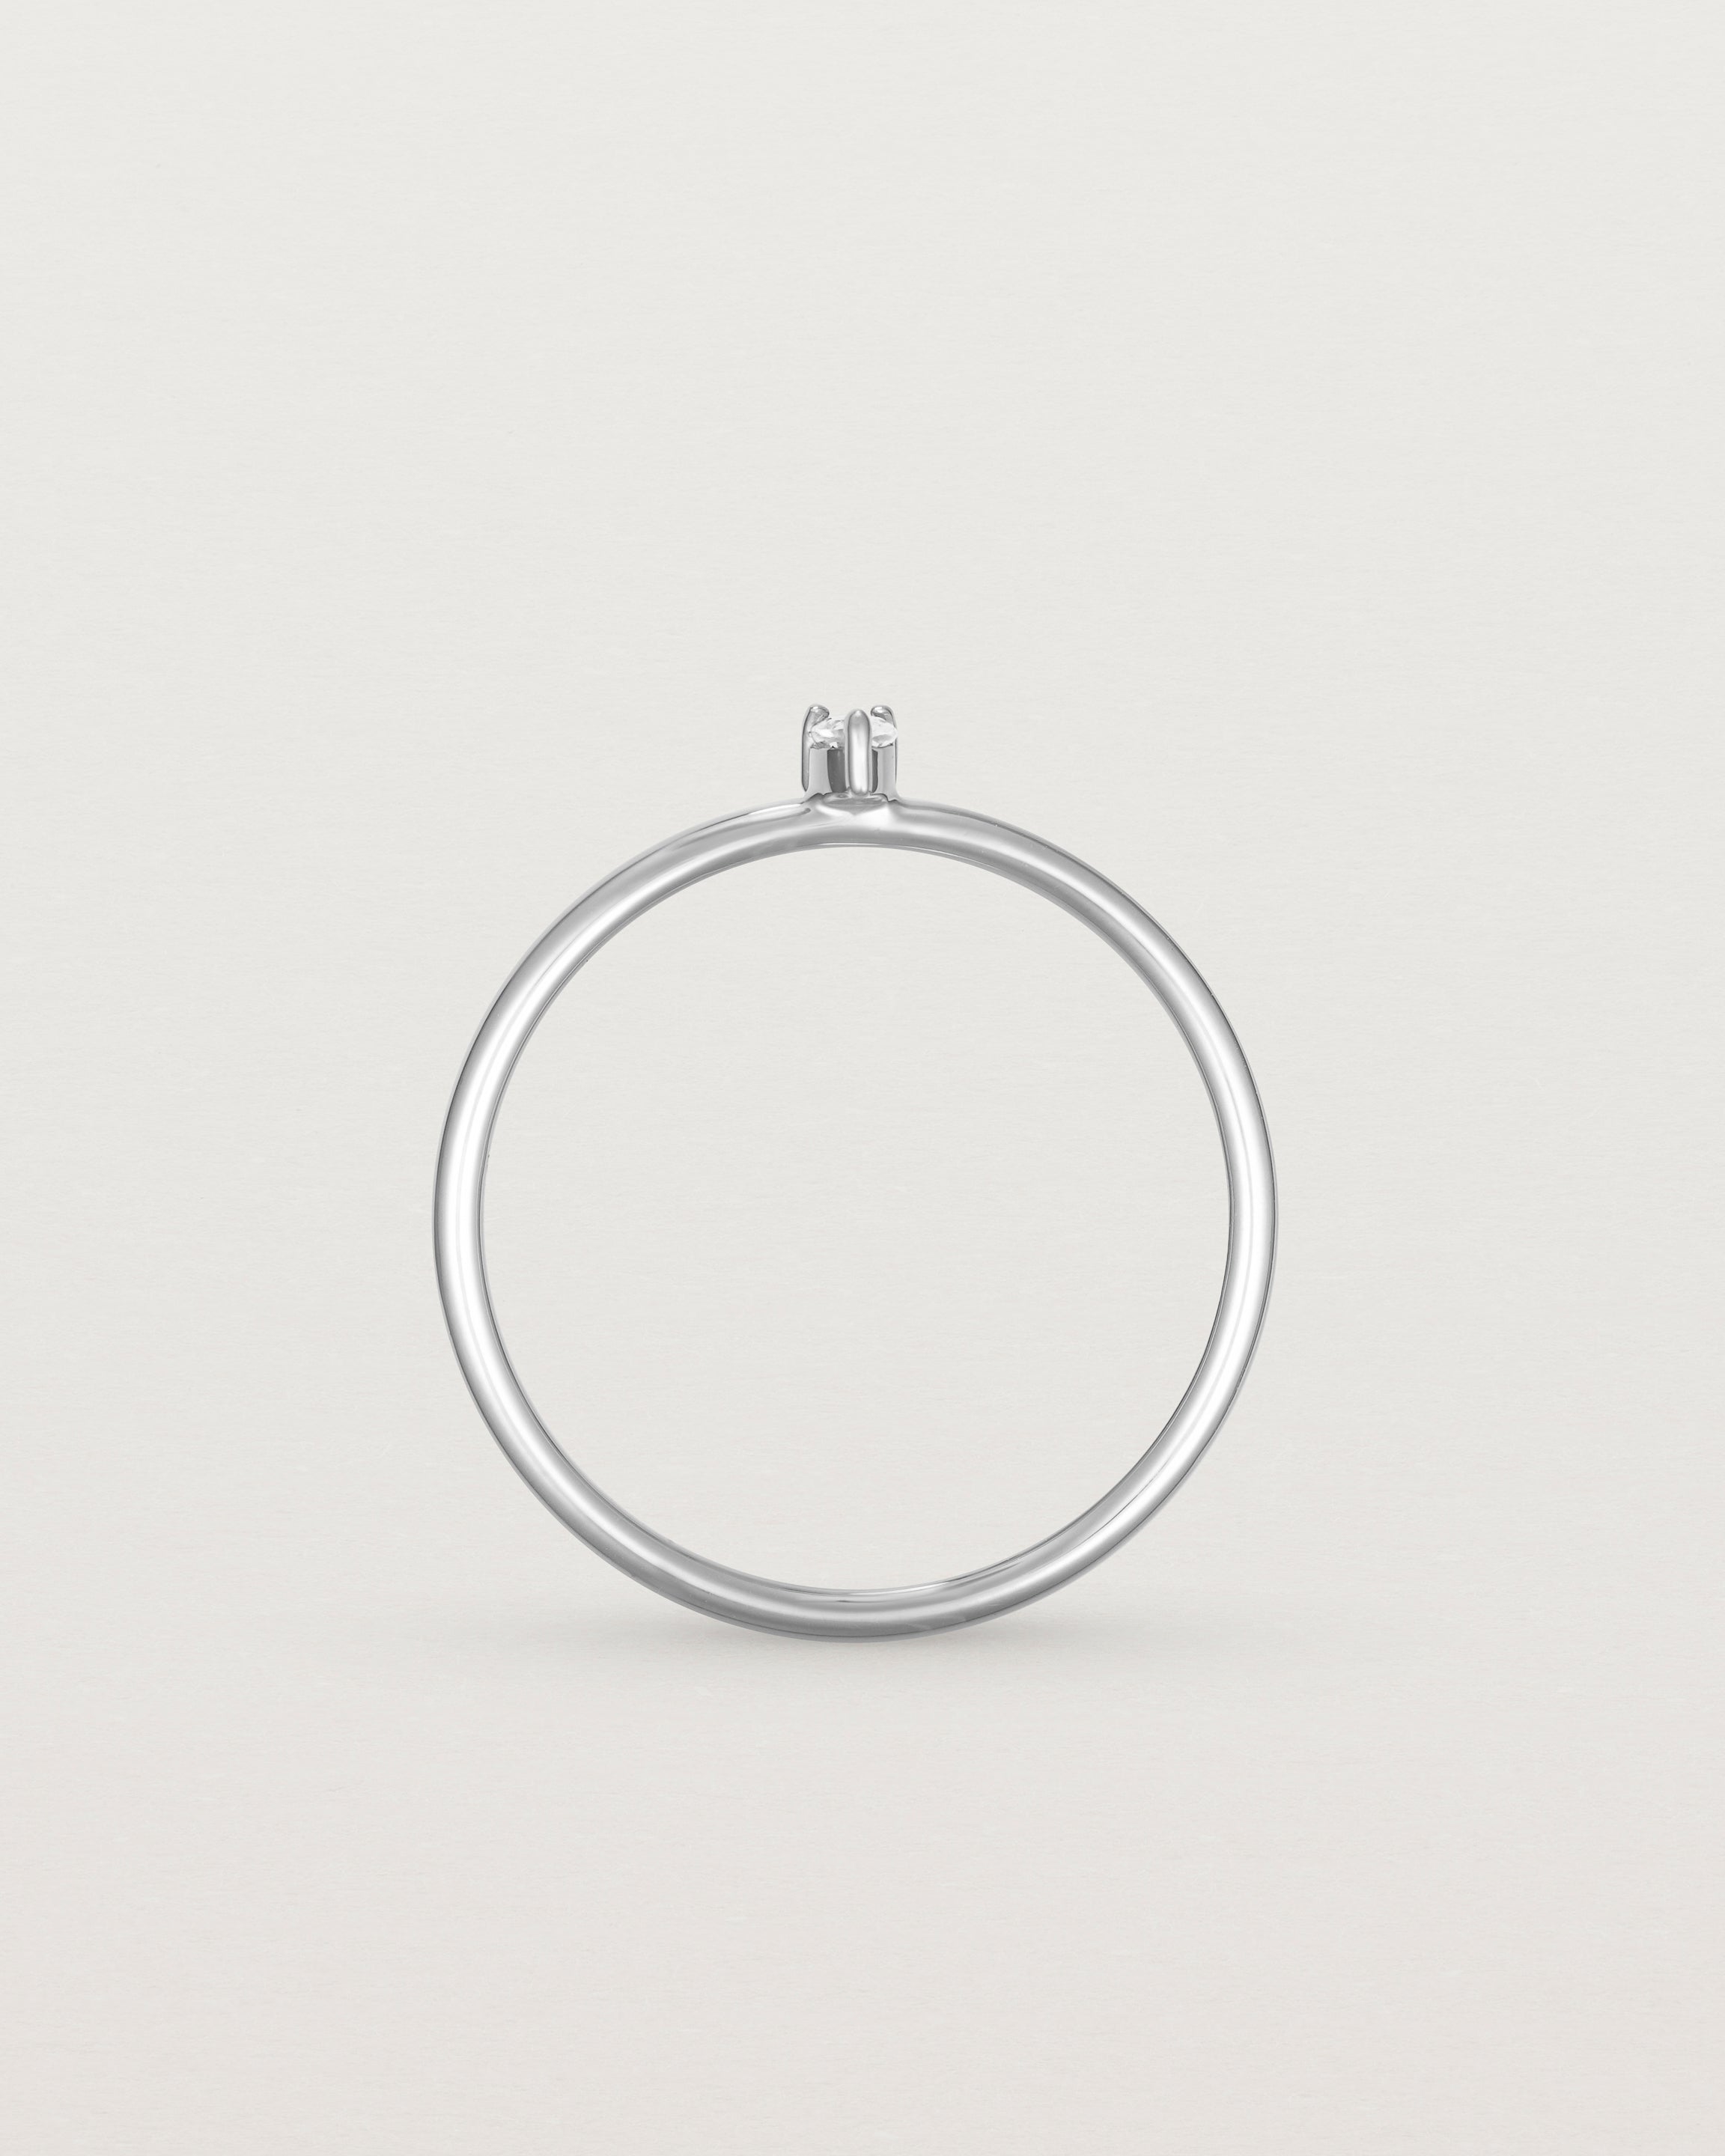 Standing view of the Danaë Stacking Ring | Diamond in white gold.